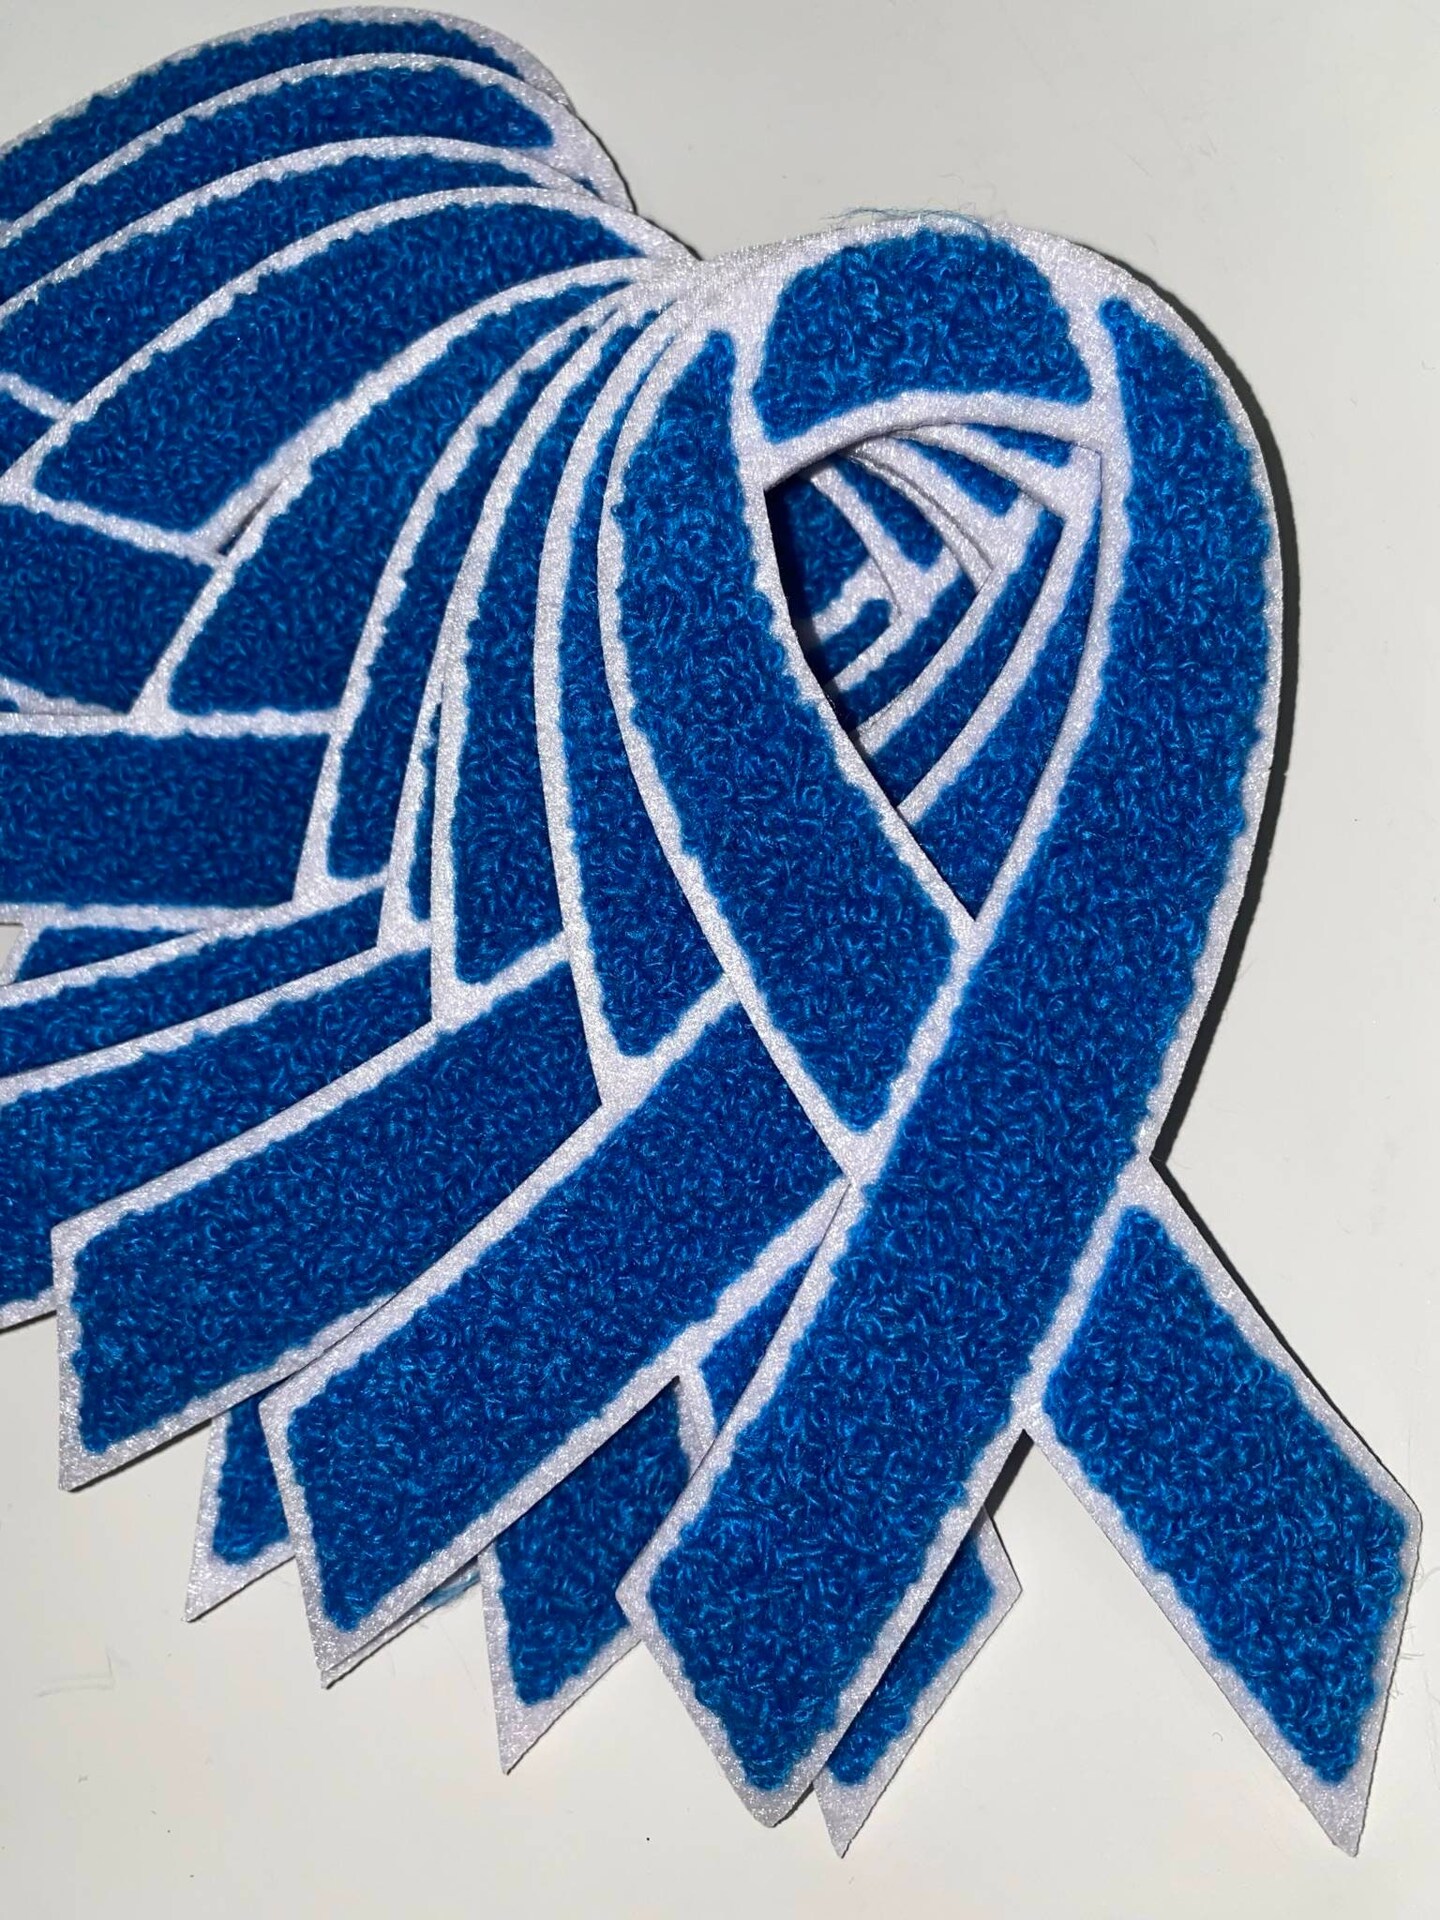 DARK BLUE RIBBON FOR COLON CANCER AWARENESS PATCH IRON ON